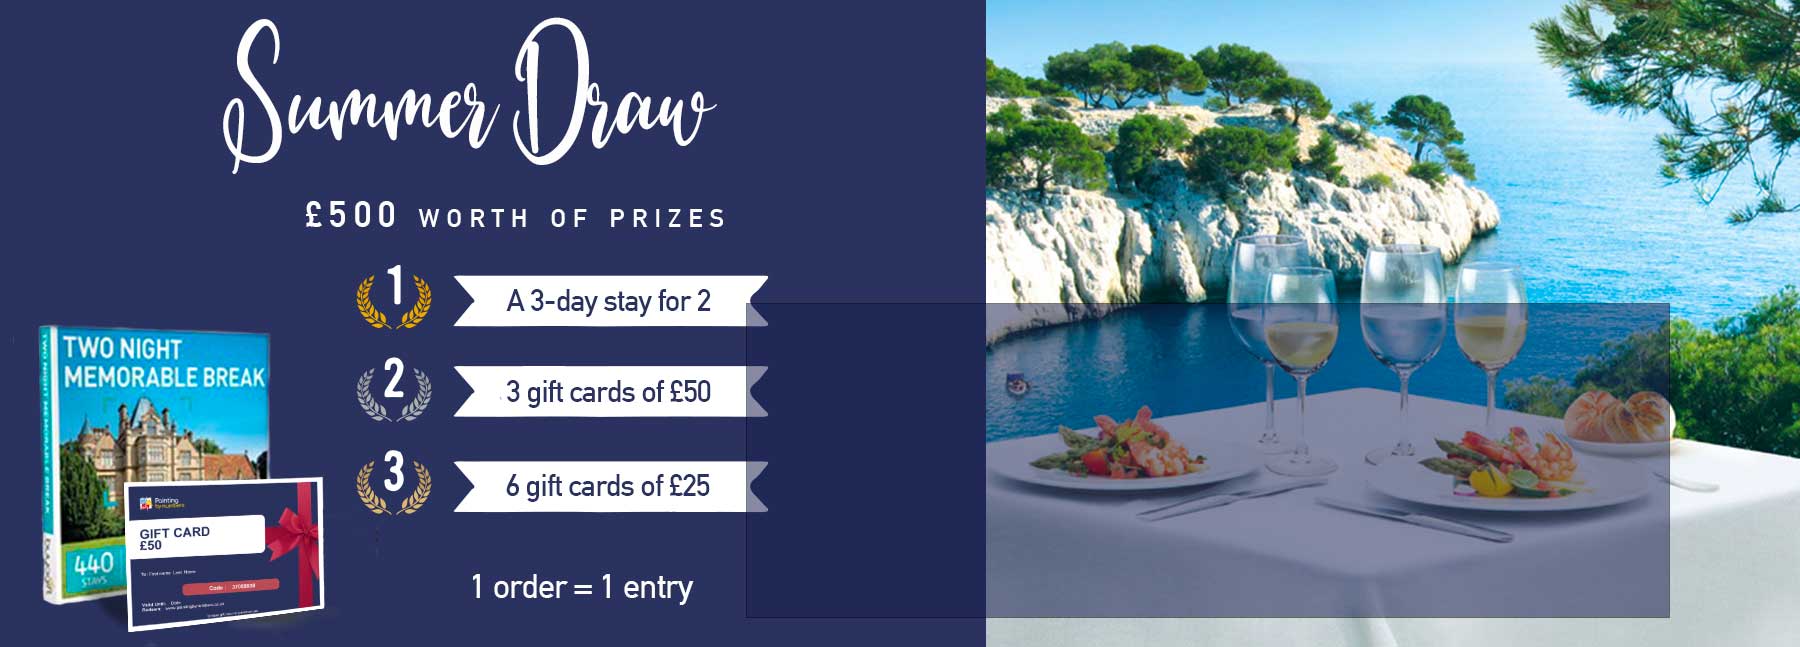 TAKE PART IN OUR SUMMER DRAW and win 1 of the 10 prizes